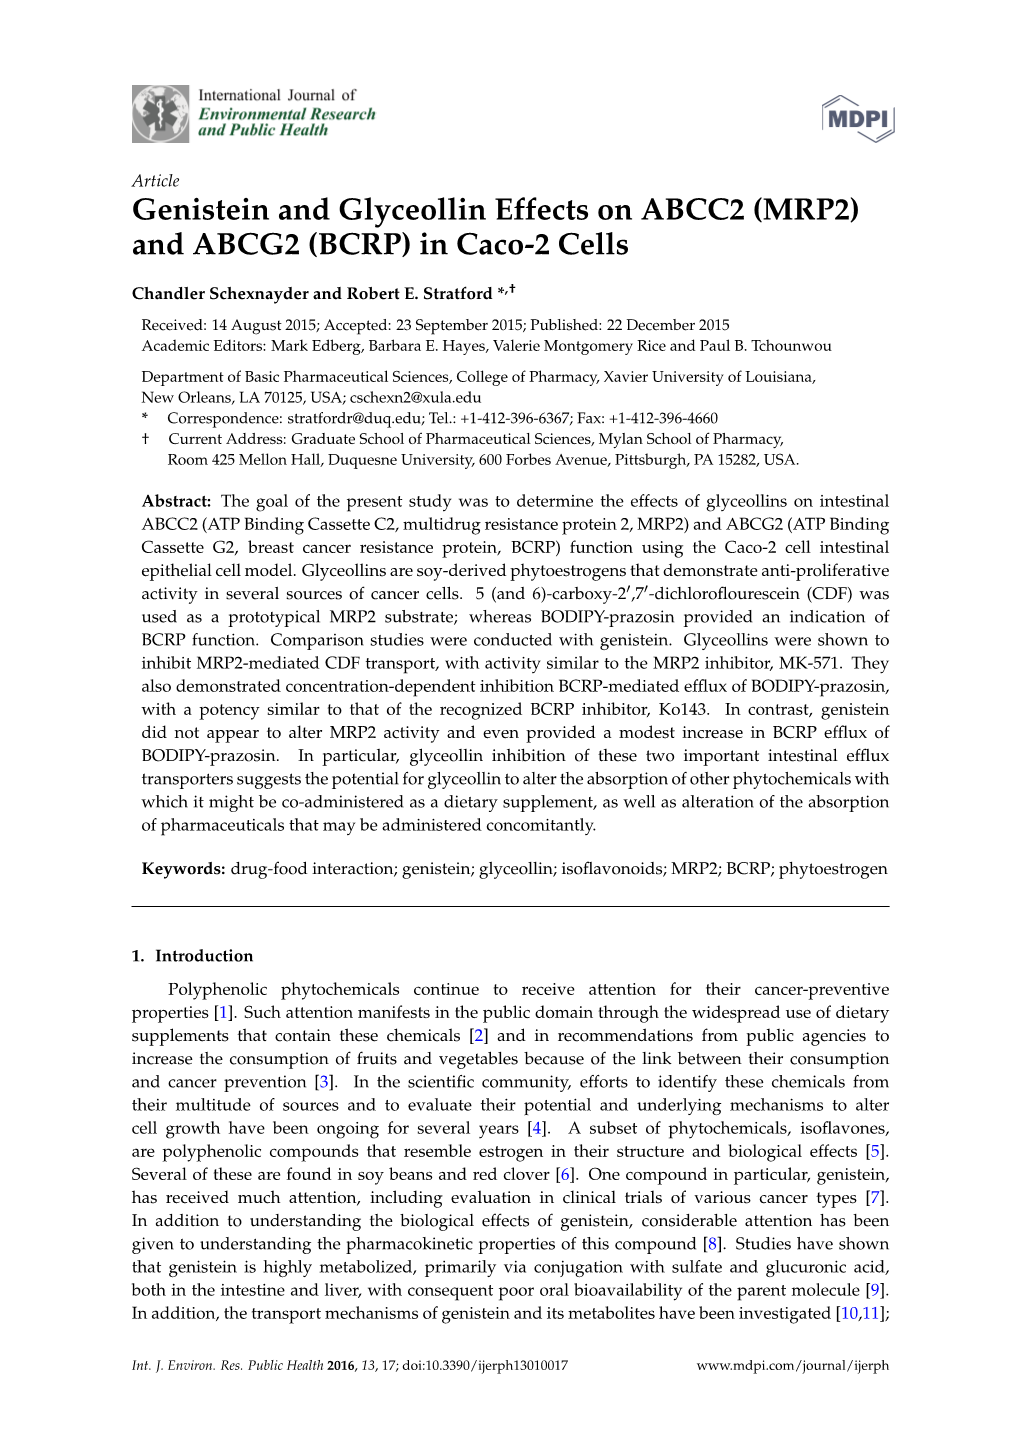 Genistein and Glyceollin Effects on ABCC2 (MRP2) and ABCG2 (BCRP) in Caco-2 Cells